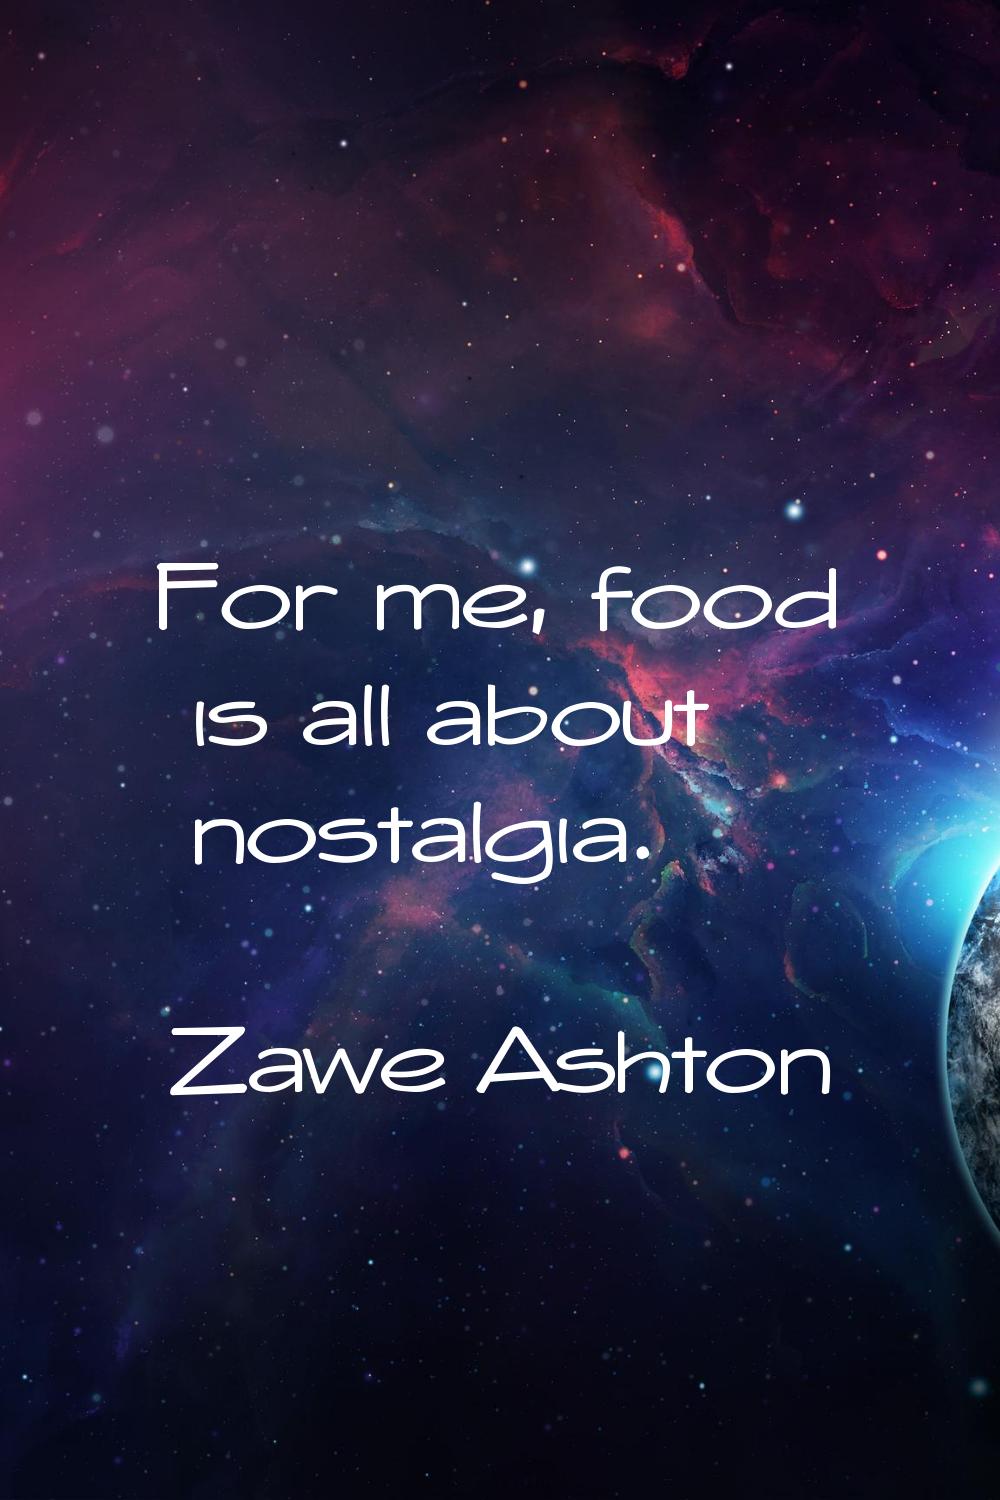 For me, food is all about nostalgia.